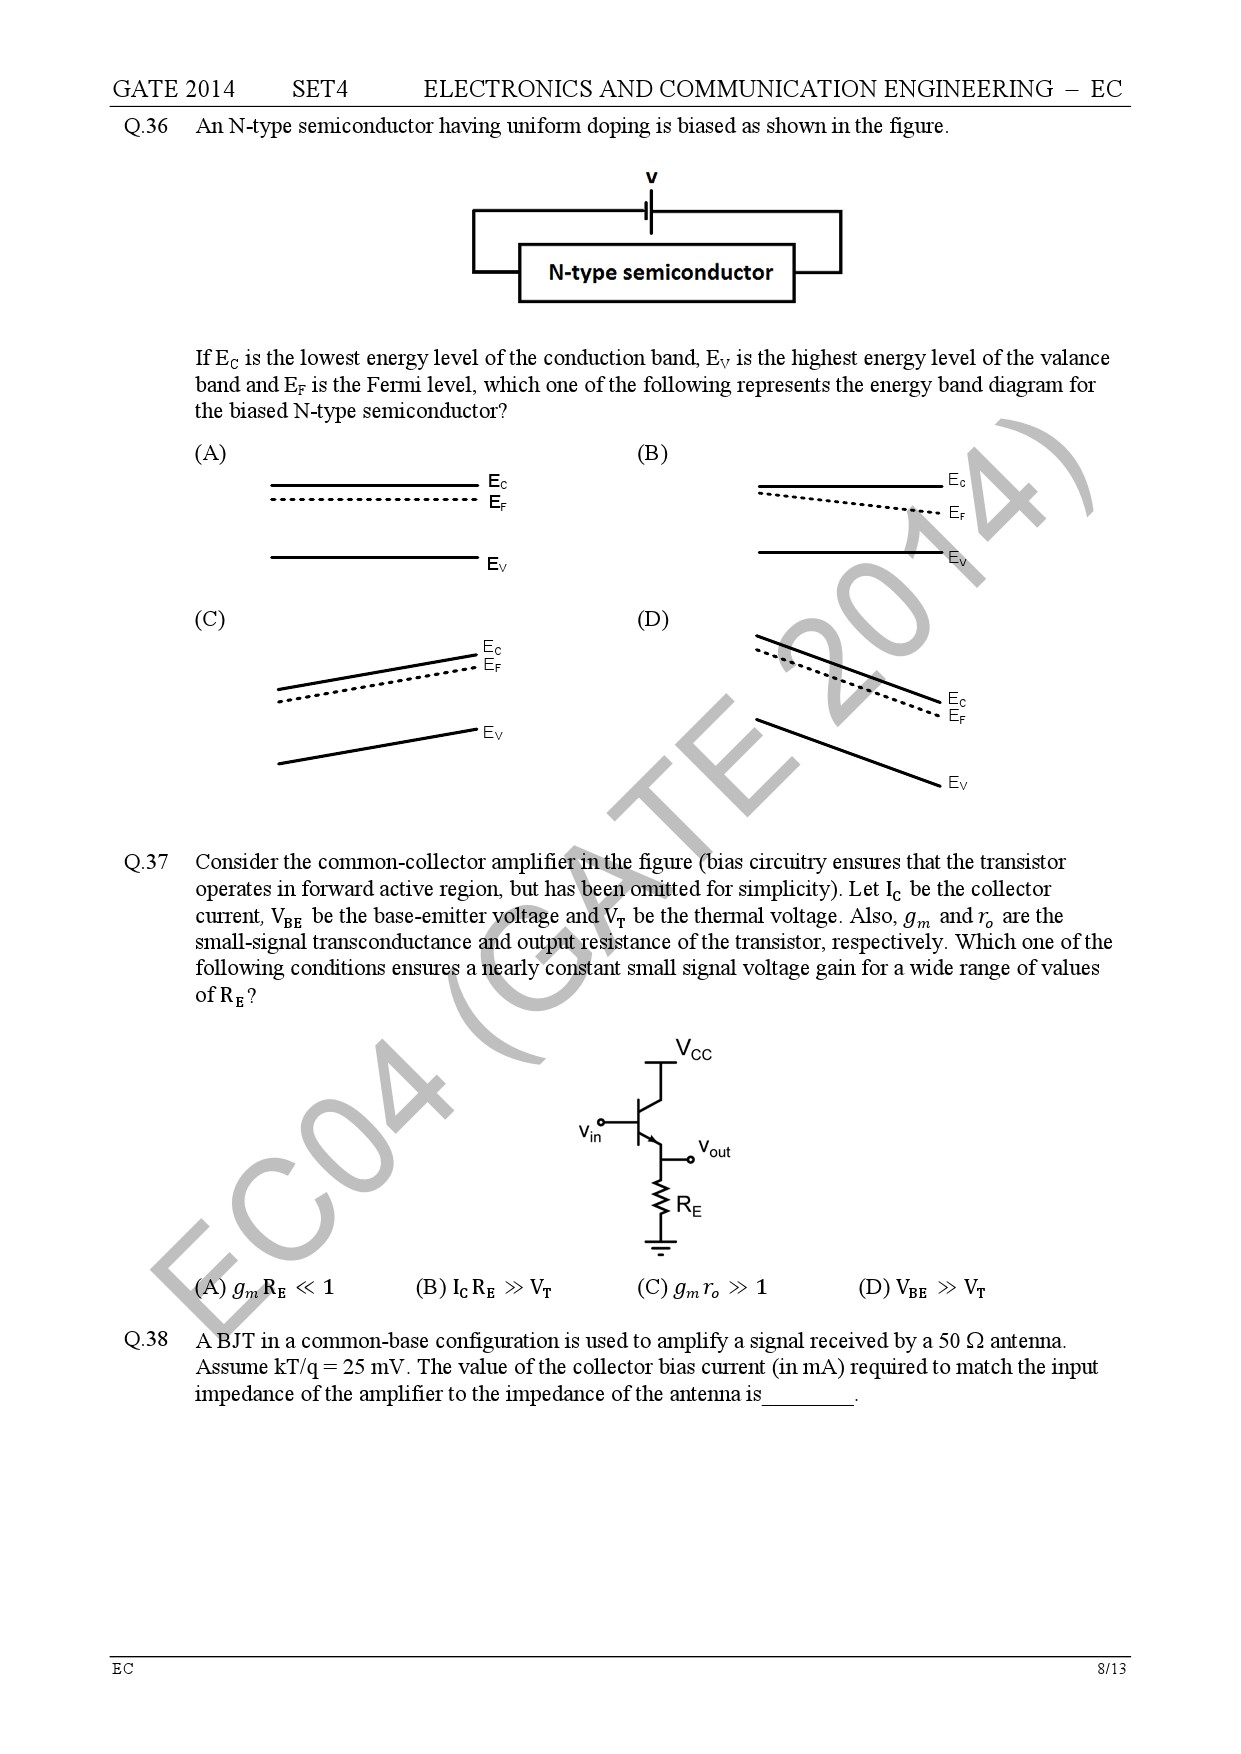 GATE Exam Question Paper 2014 Electronics and Communication Engineering Set 4 14